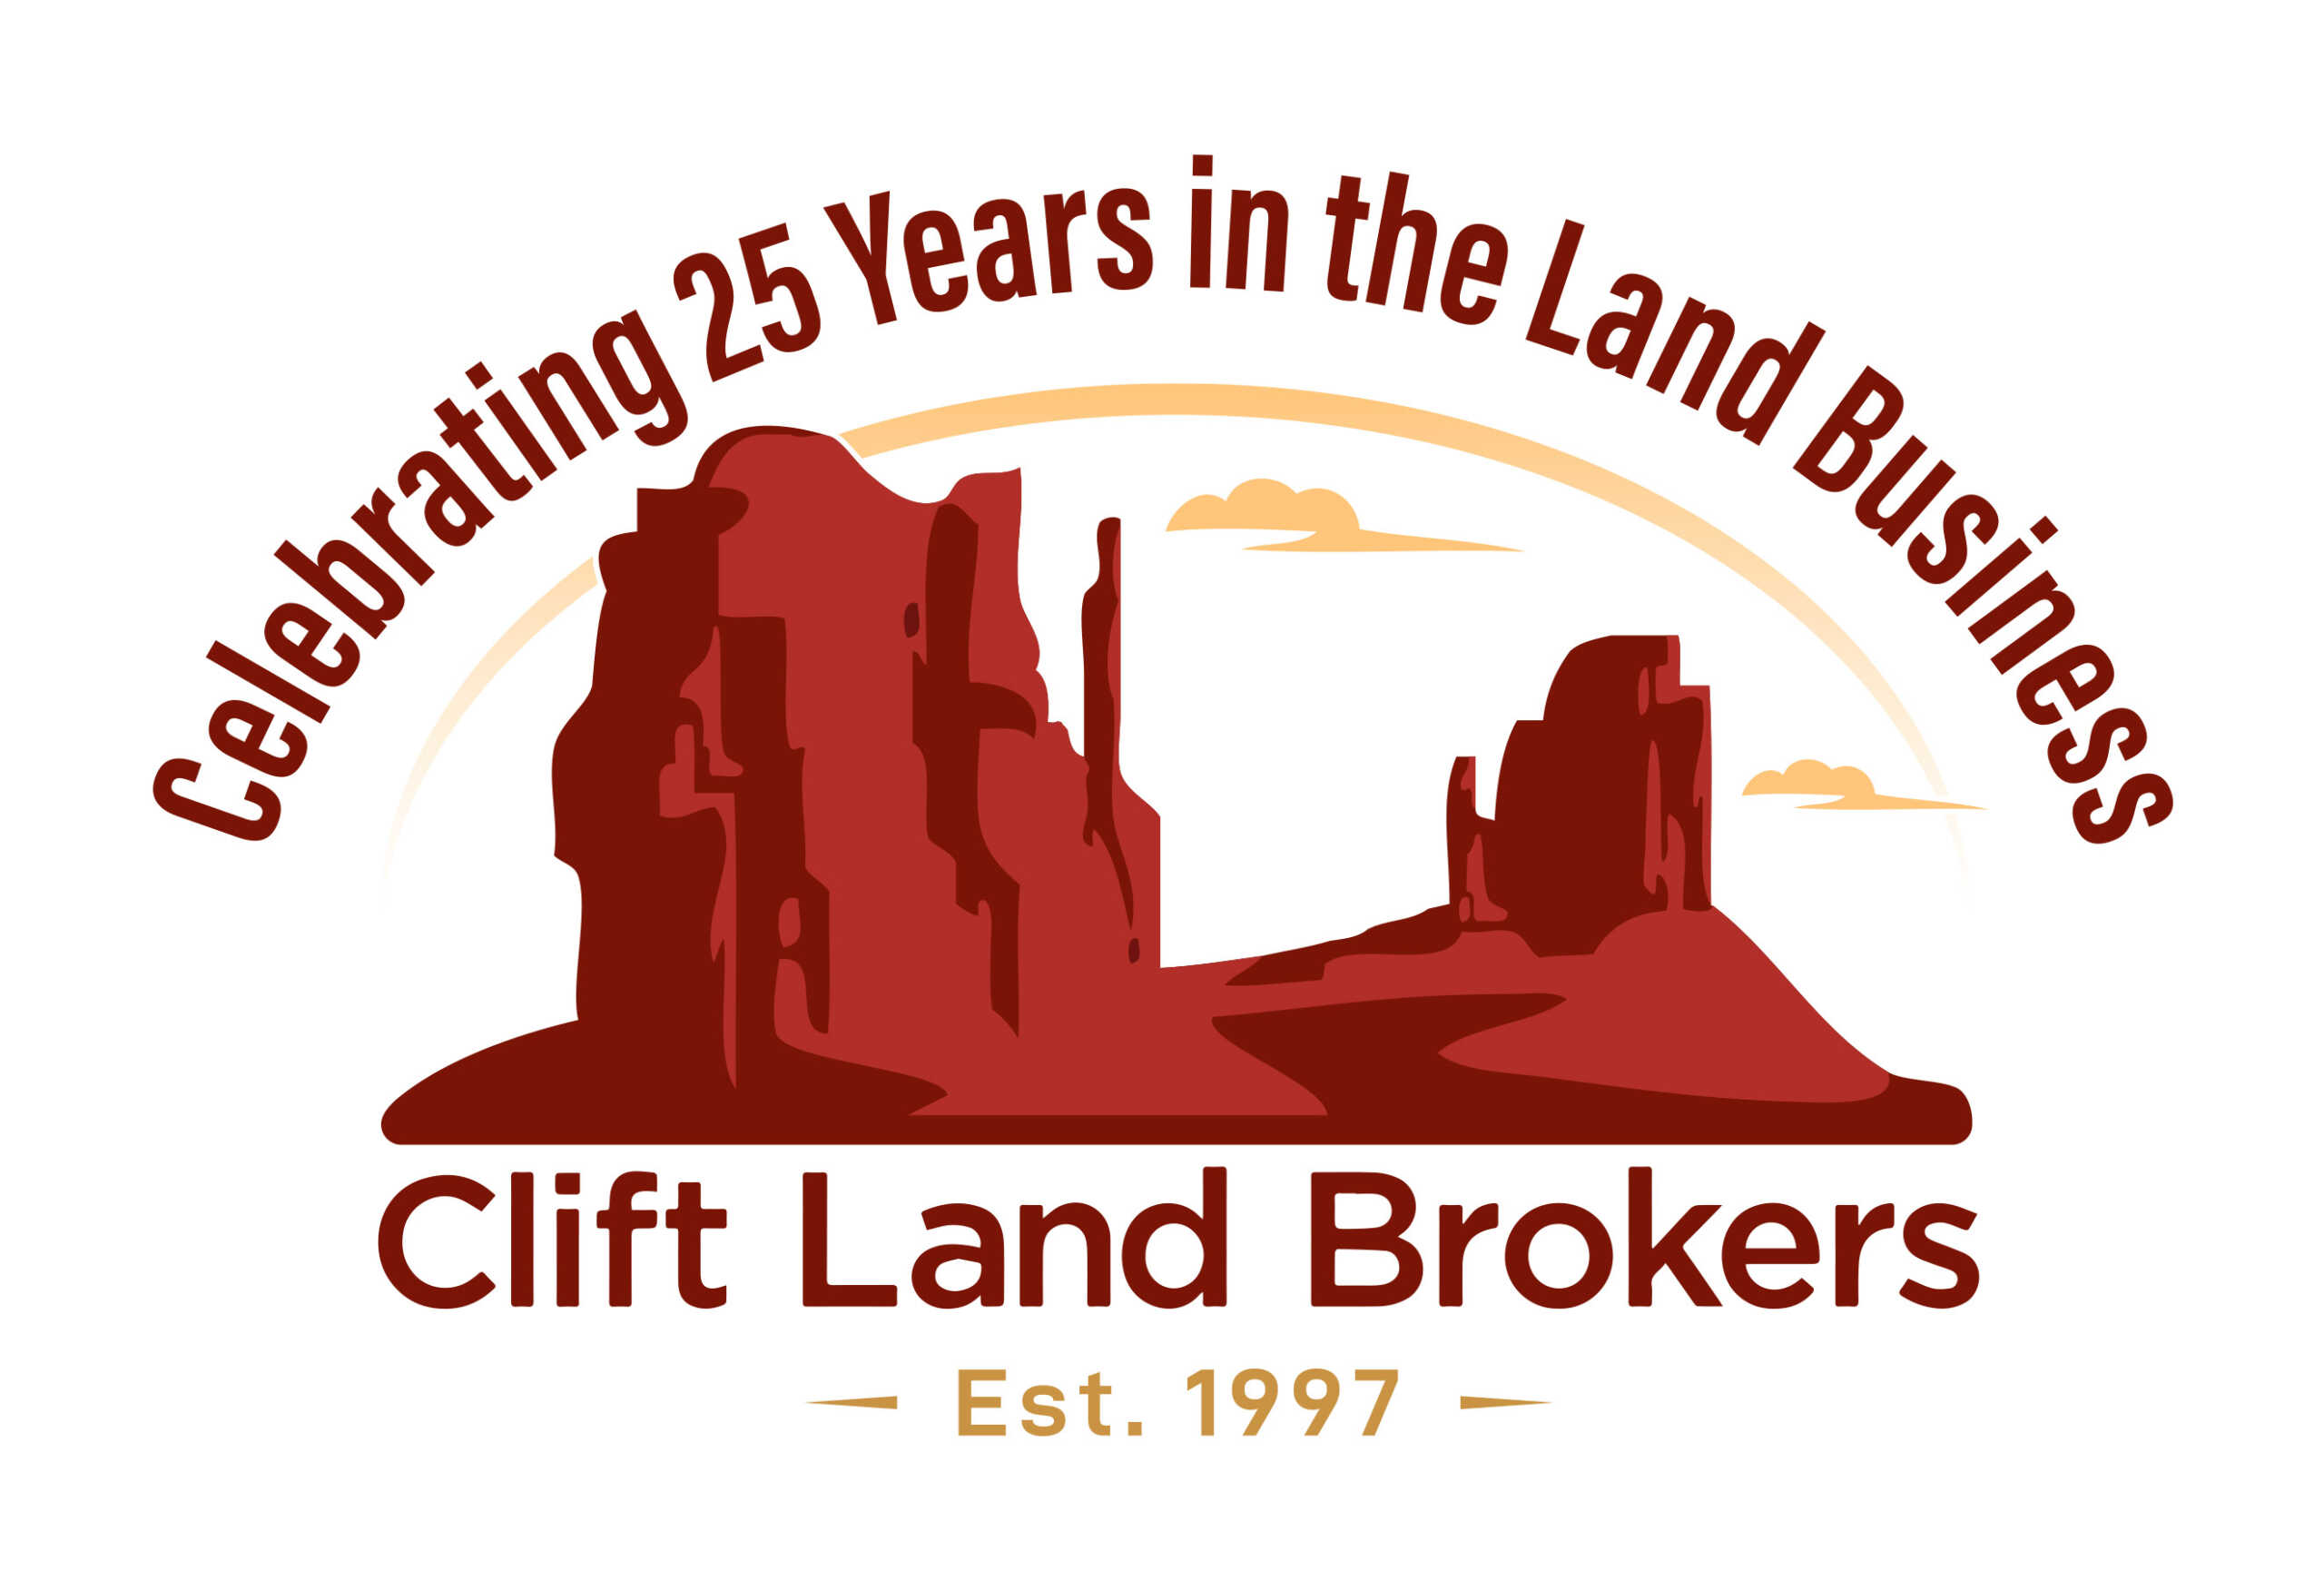 Clift Land Brokers